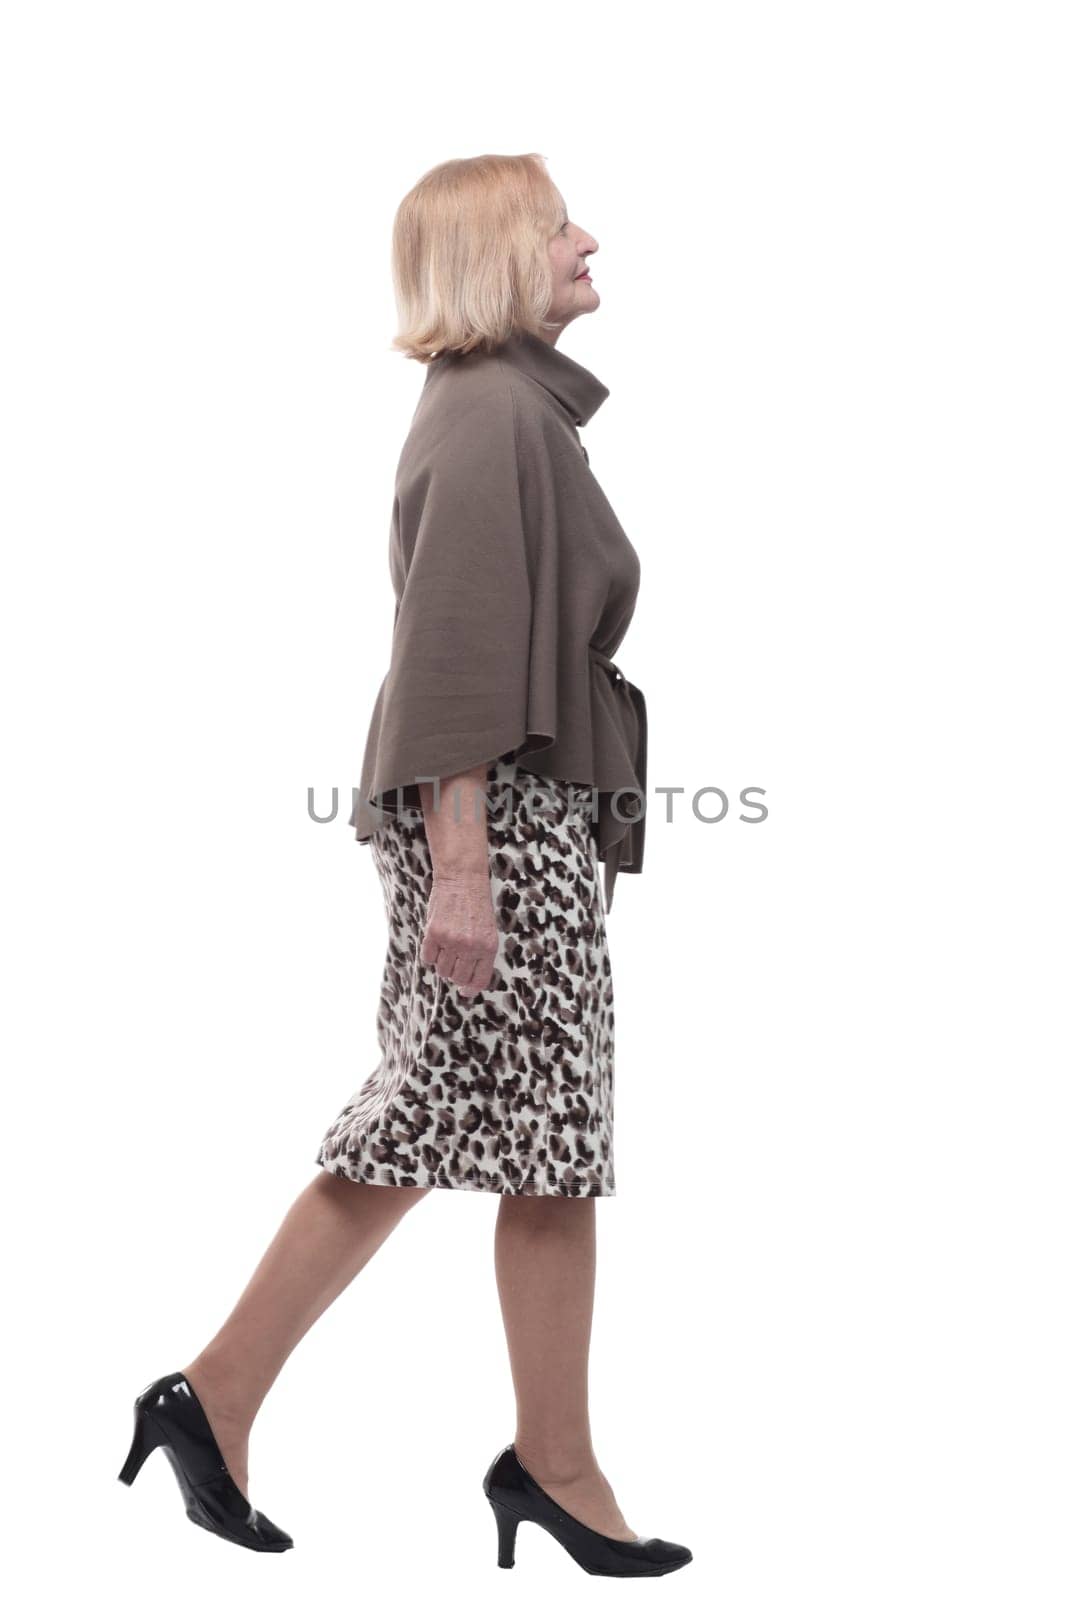 adult woman in a fashionable blouse striding forward . by asdf